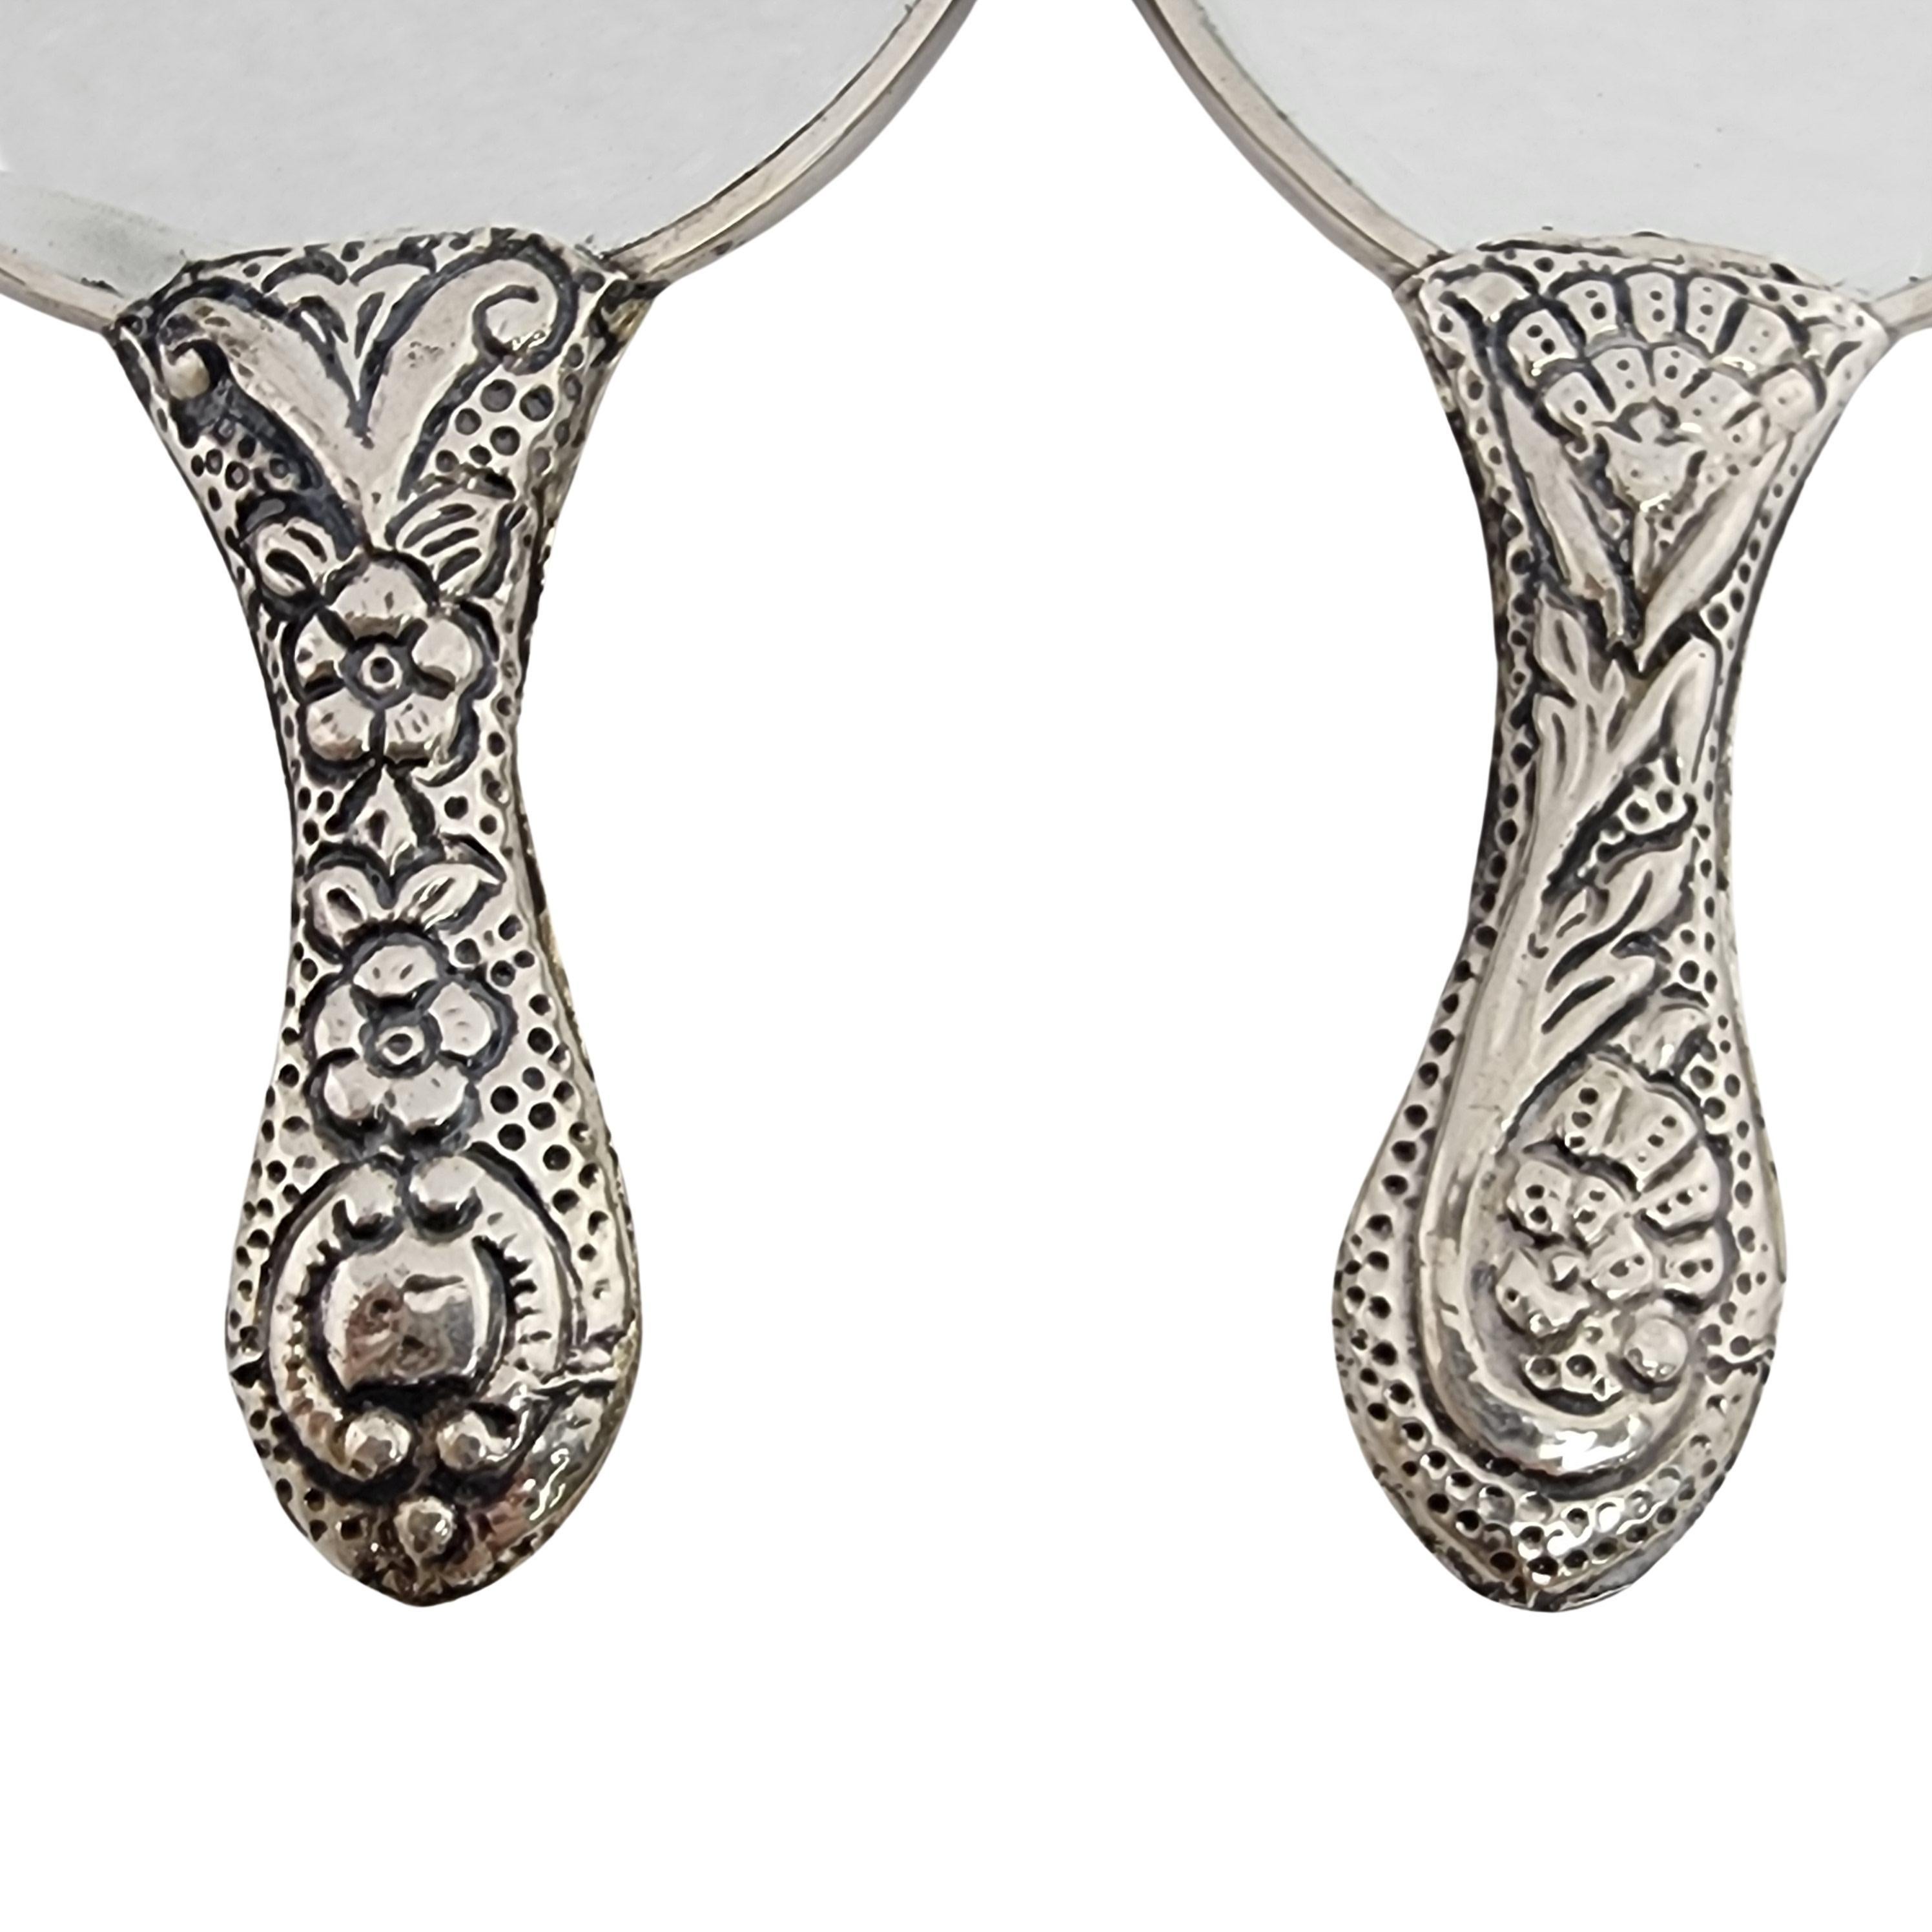 Set of 2 Turan Turkey 900 Silver Repousse Hand Mirrors #15964 For Sale 2